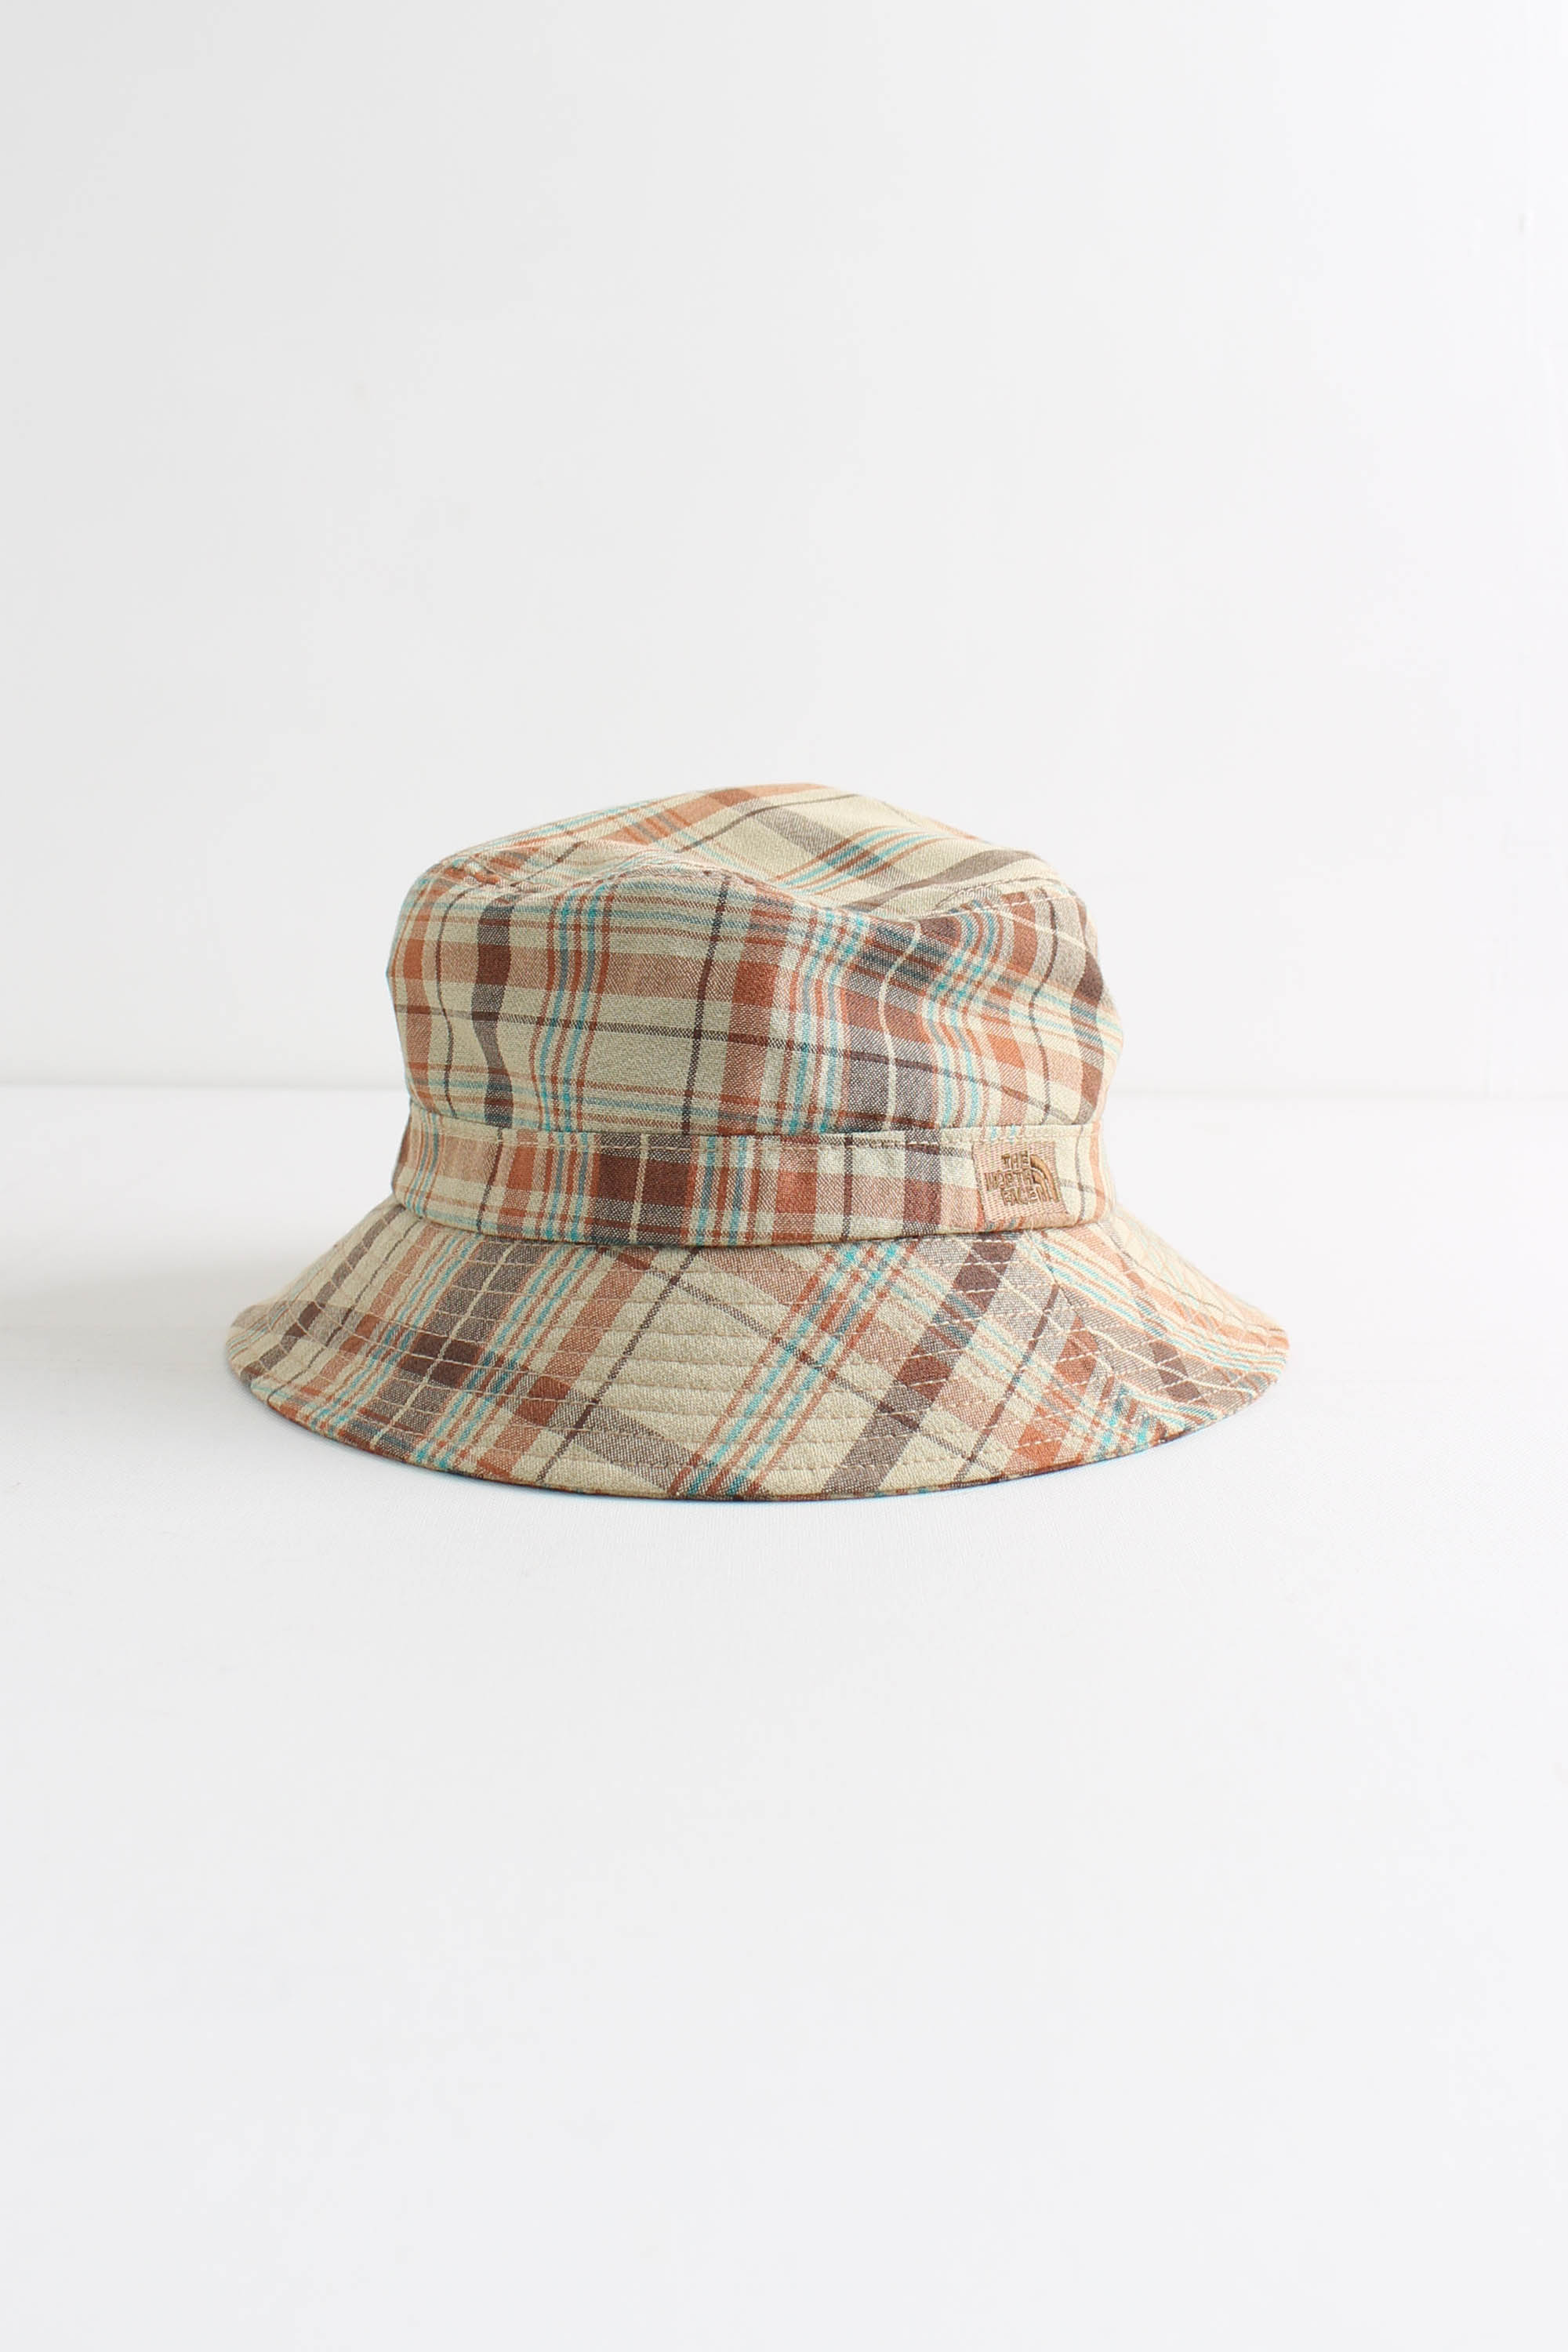 THE NORTH FACE PURPLE LABEL bucket hat